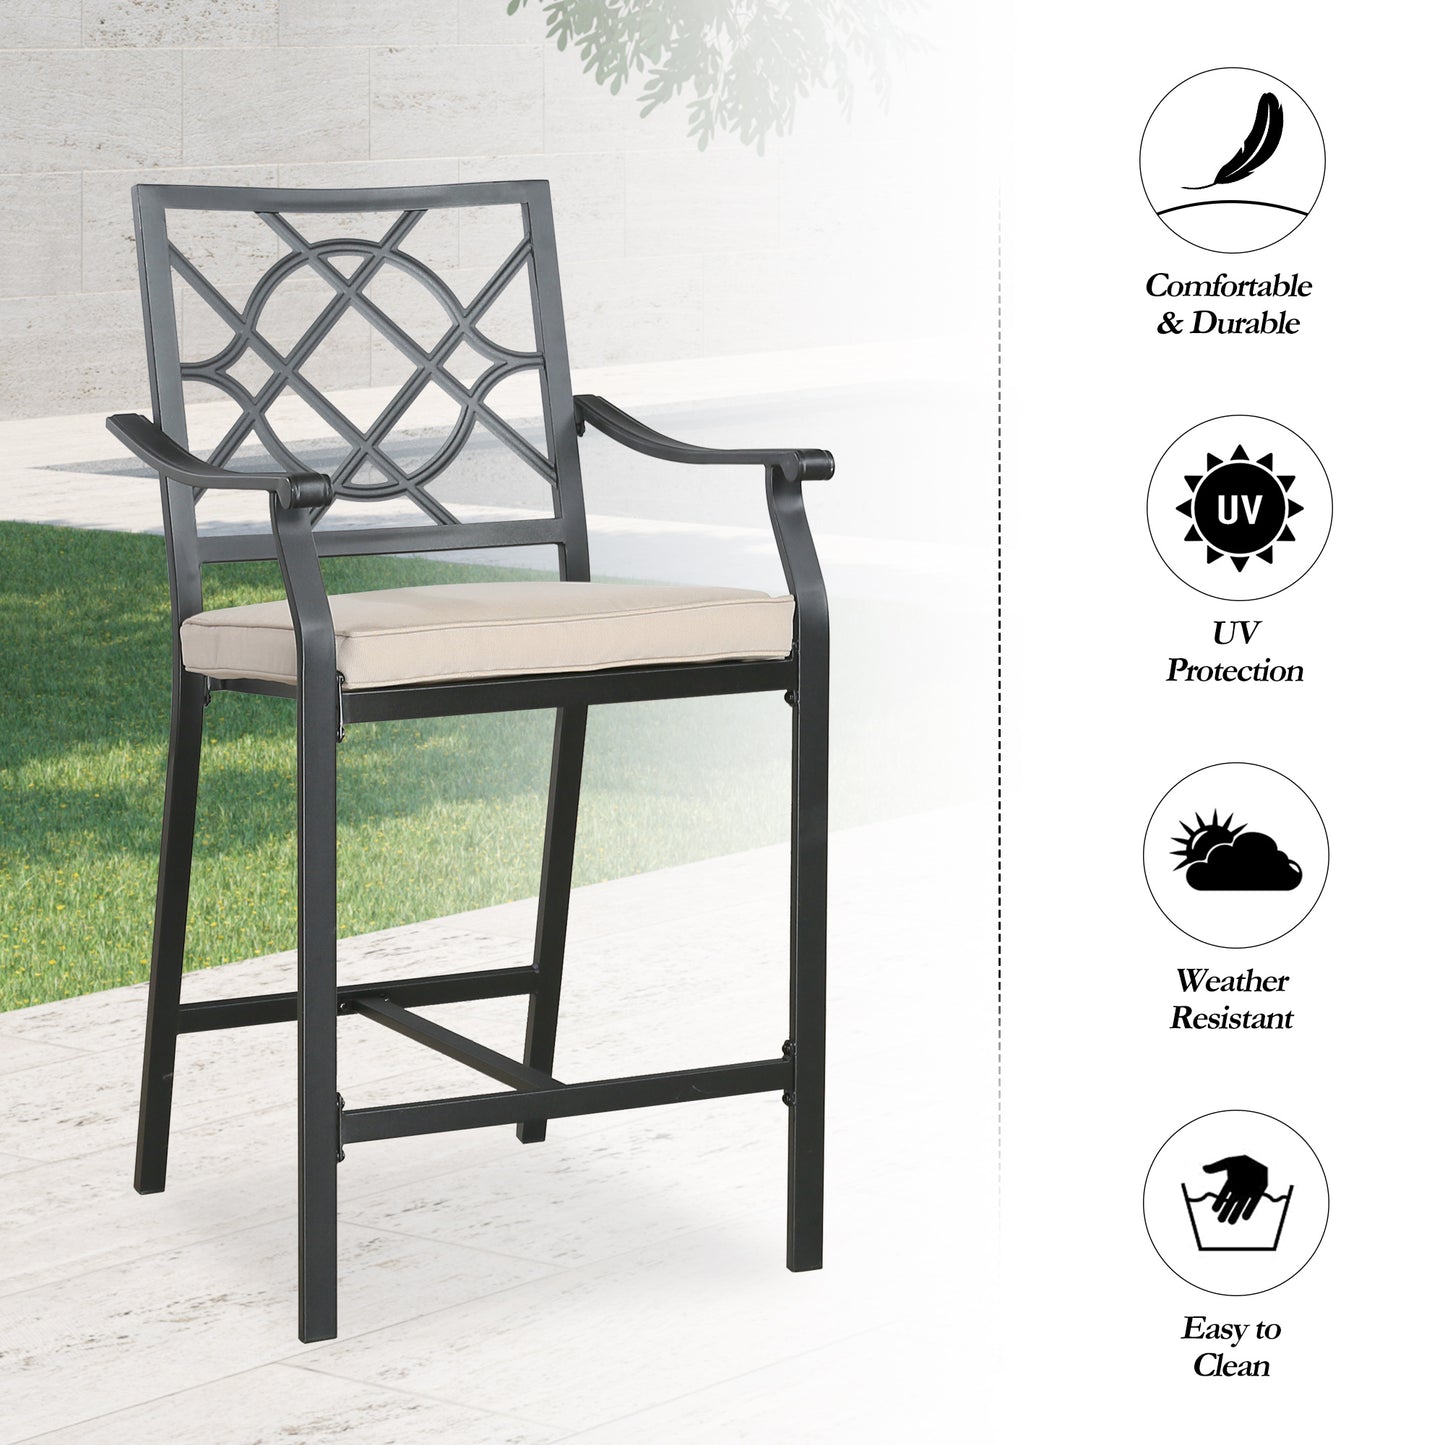 Patio Metal Steel Bar Stools Outdoor Set of 2 Bar Height Bistro Chairs with Beige Seat Cushions